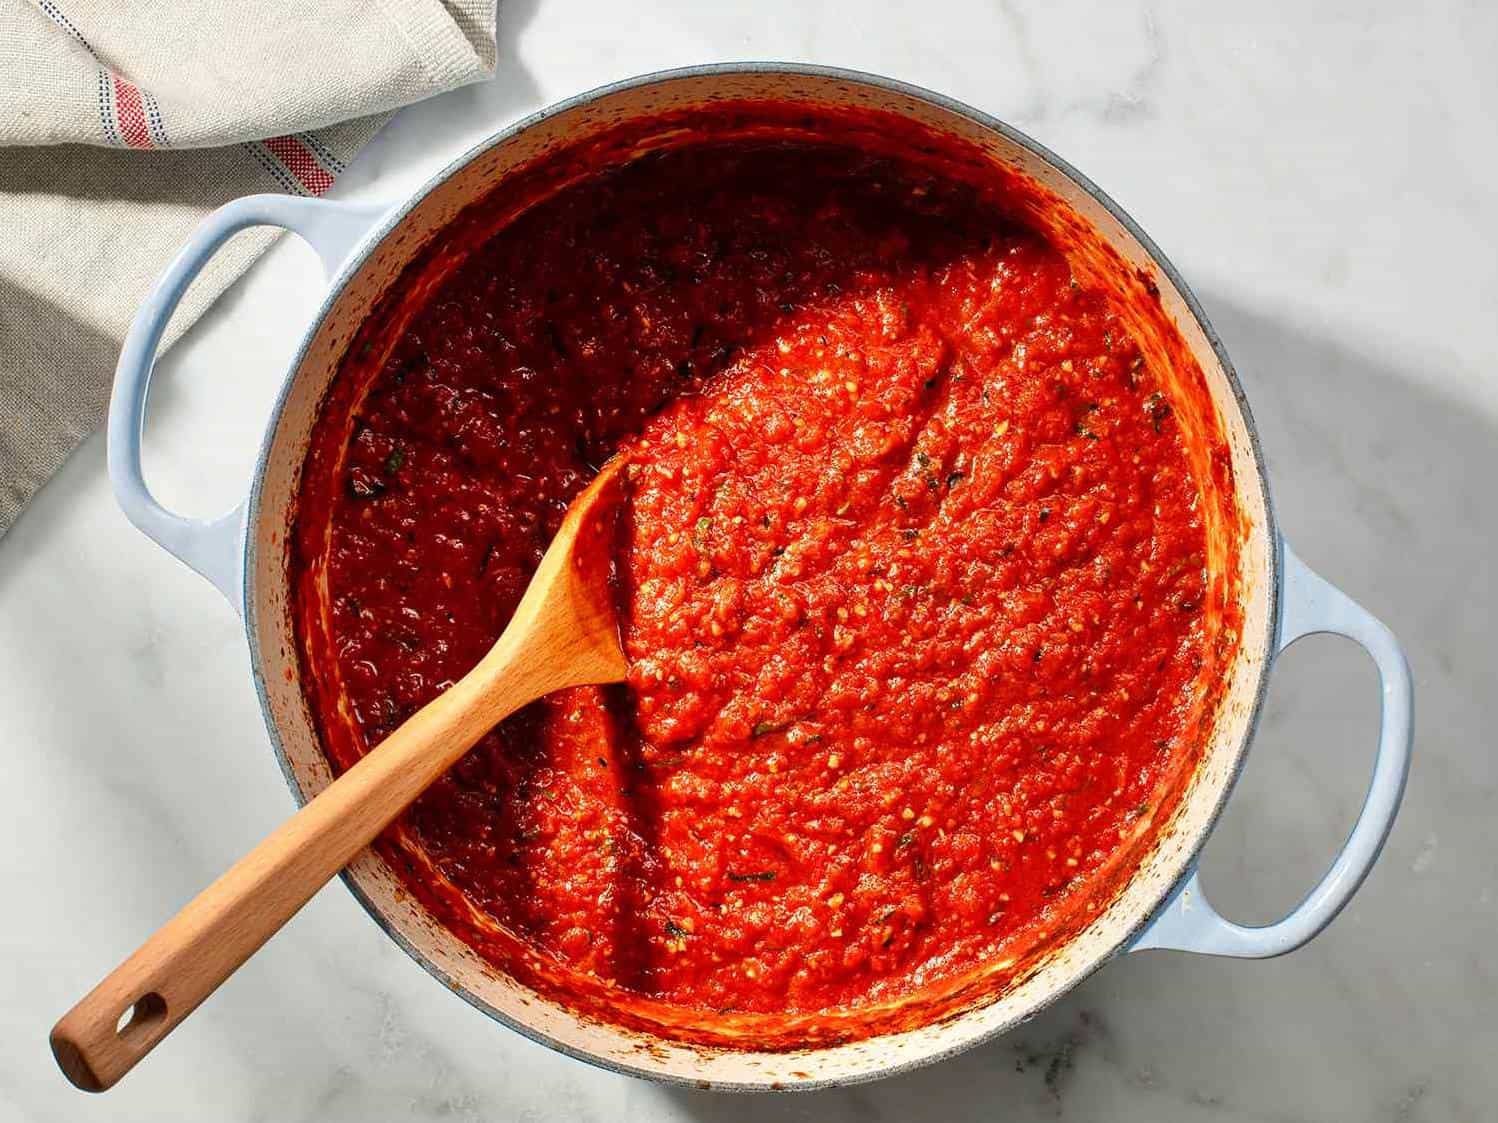  Fresh tomatoes are the key to a delicious sauce.